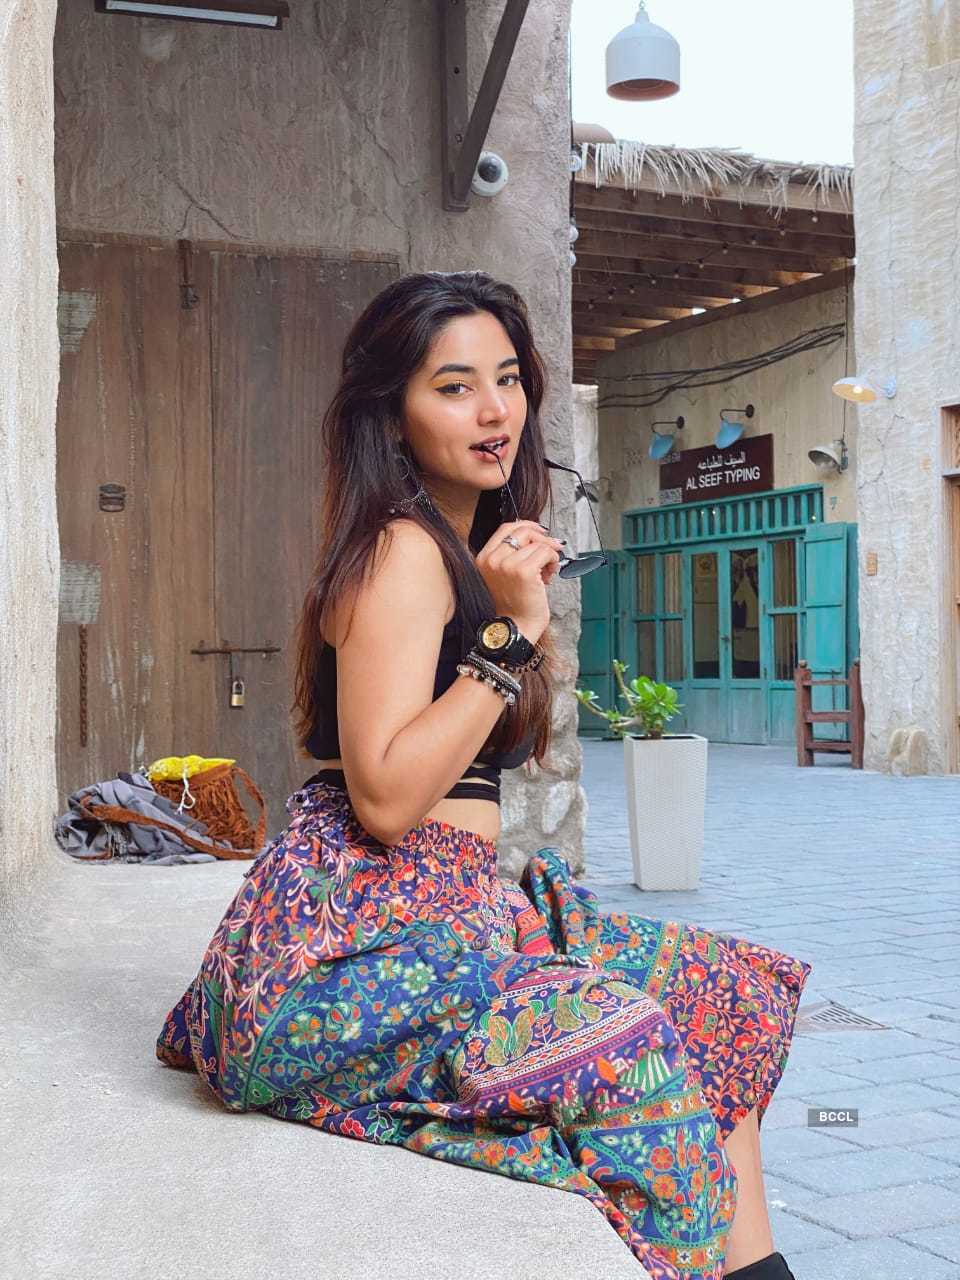 Meet the popular influencer Somya Gupta who's set to launch her own YouTube channel...